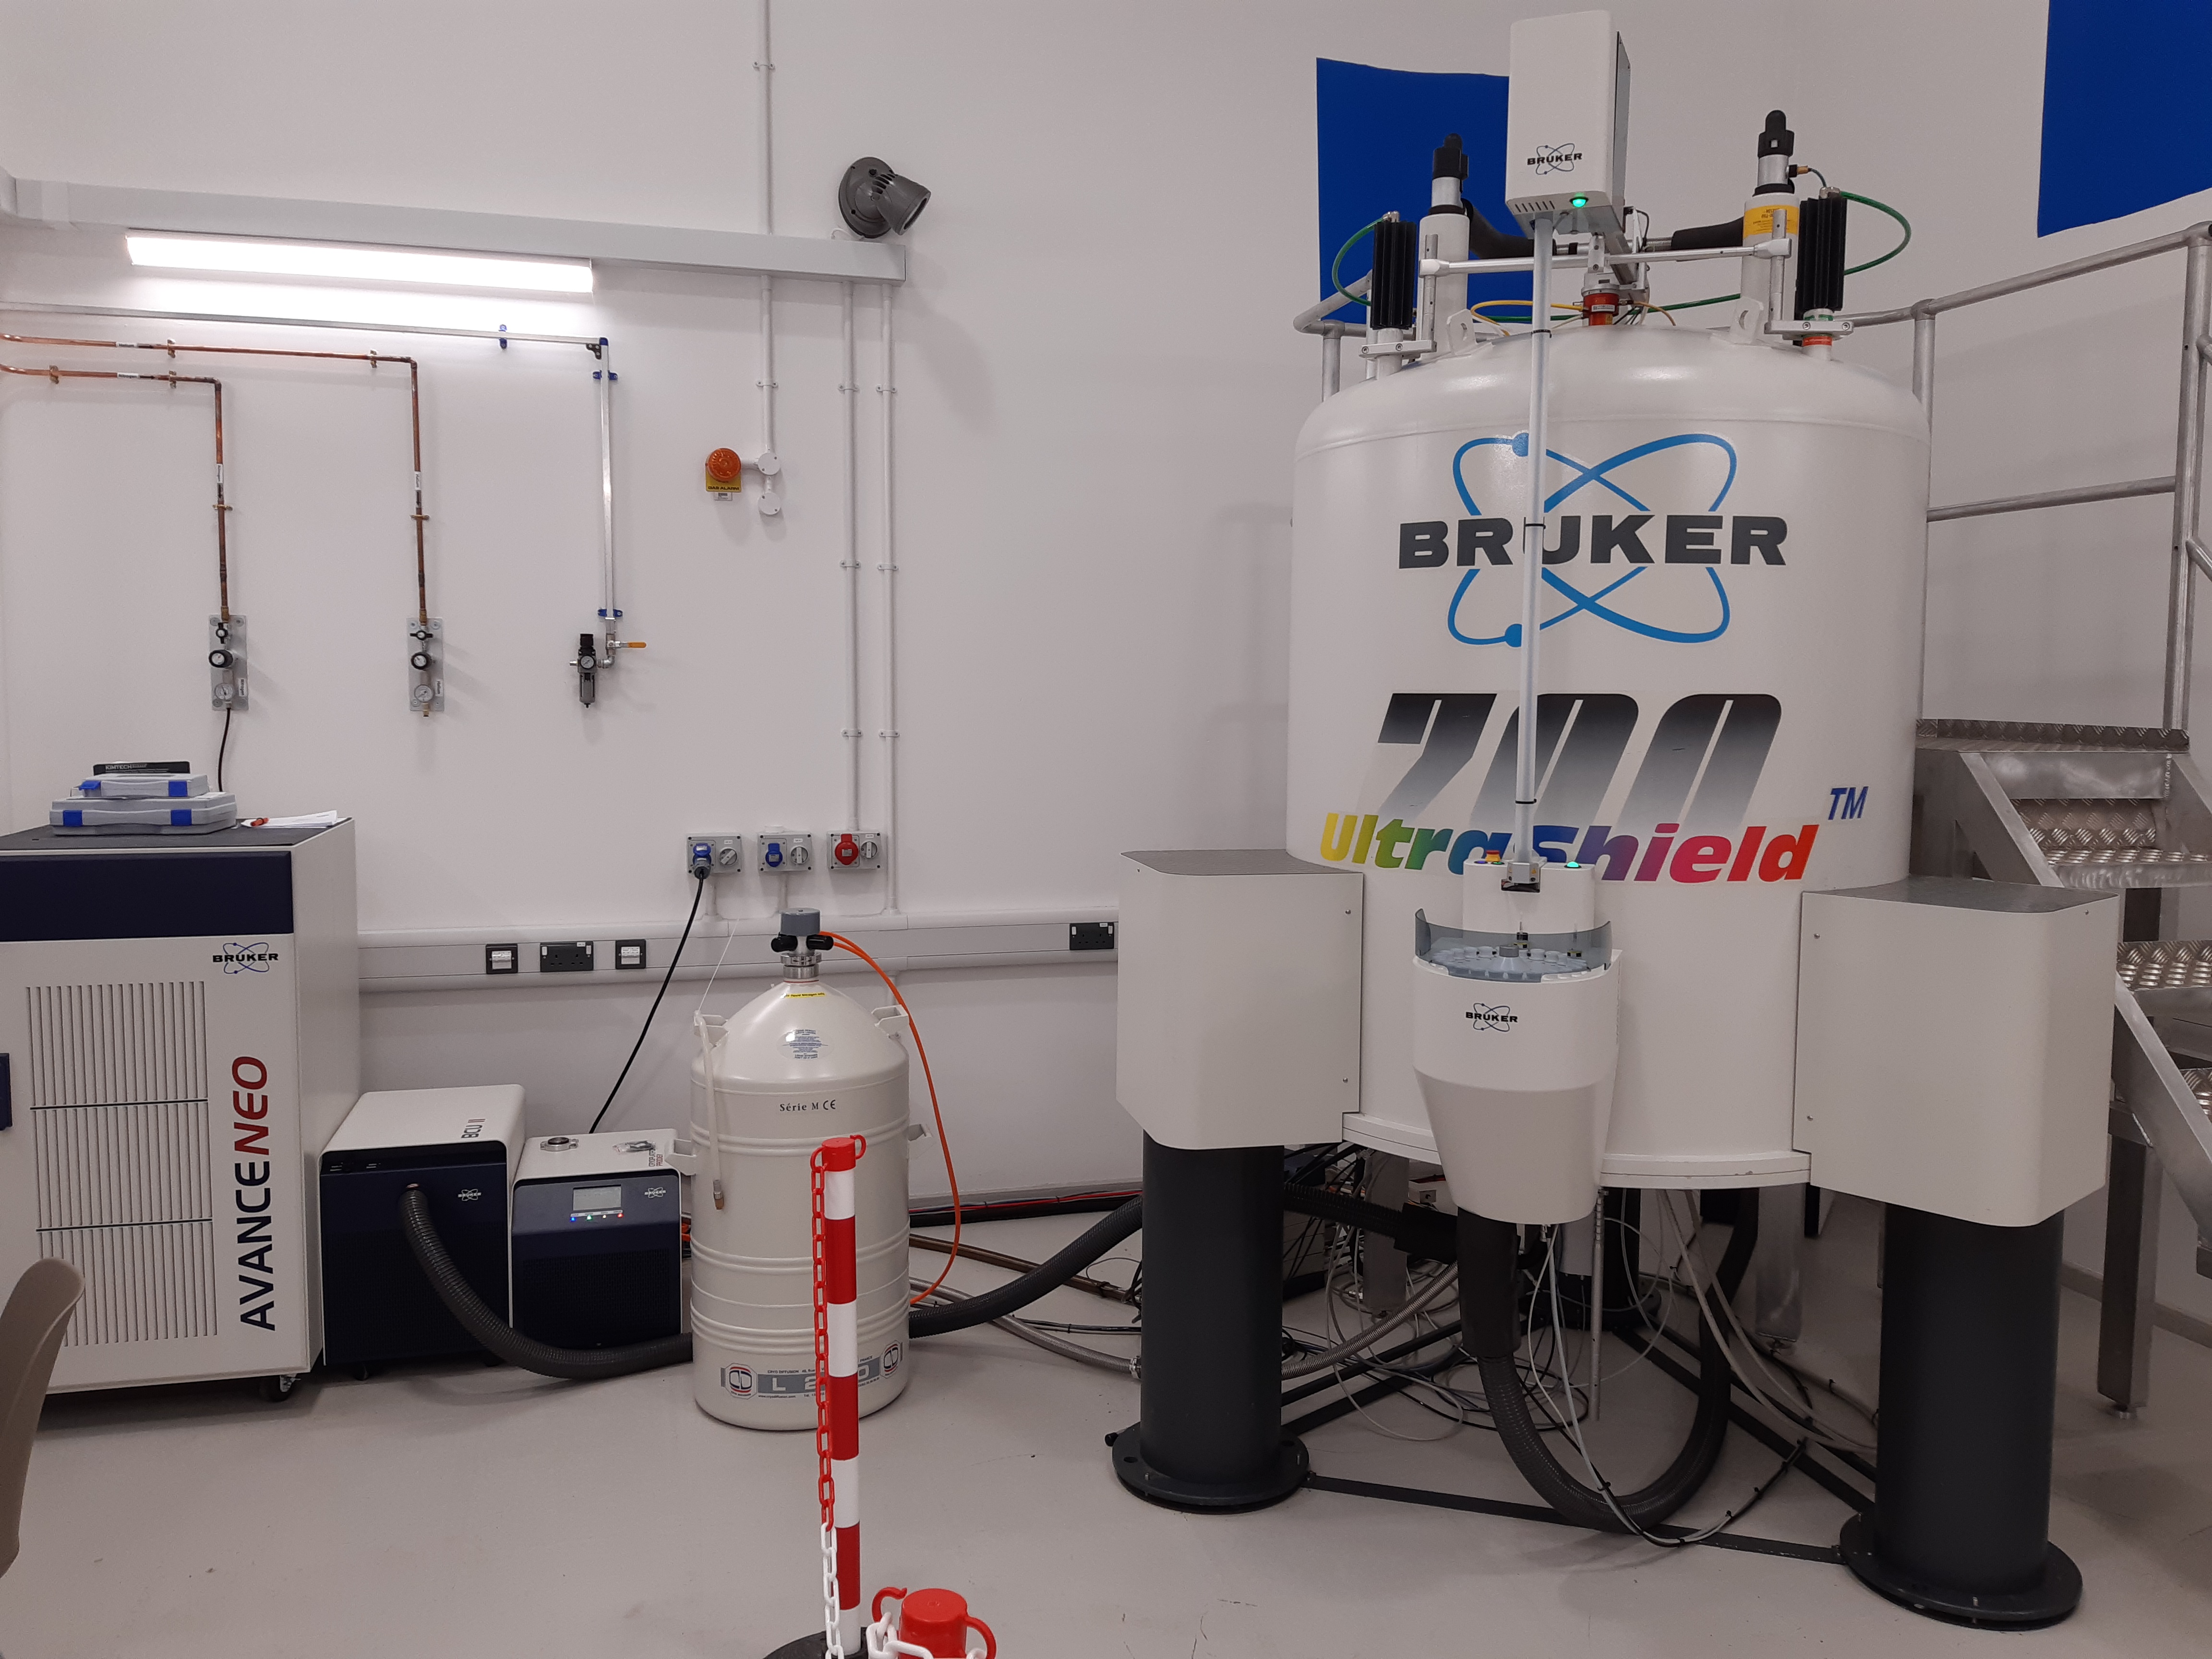 Image of the 700 MHz NMR spectrometer at York